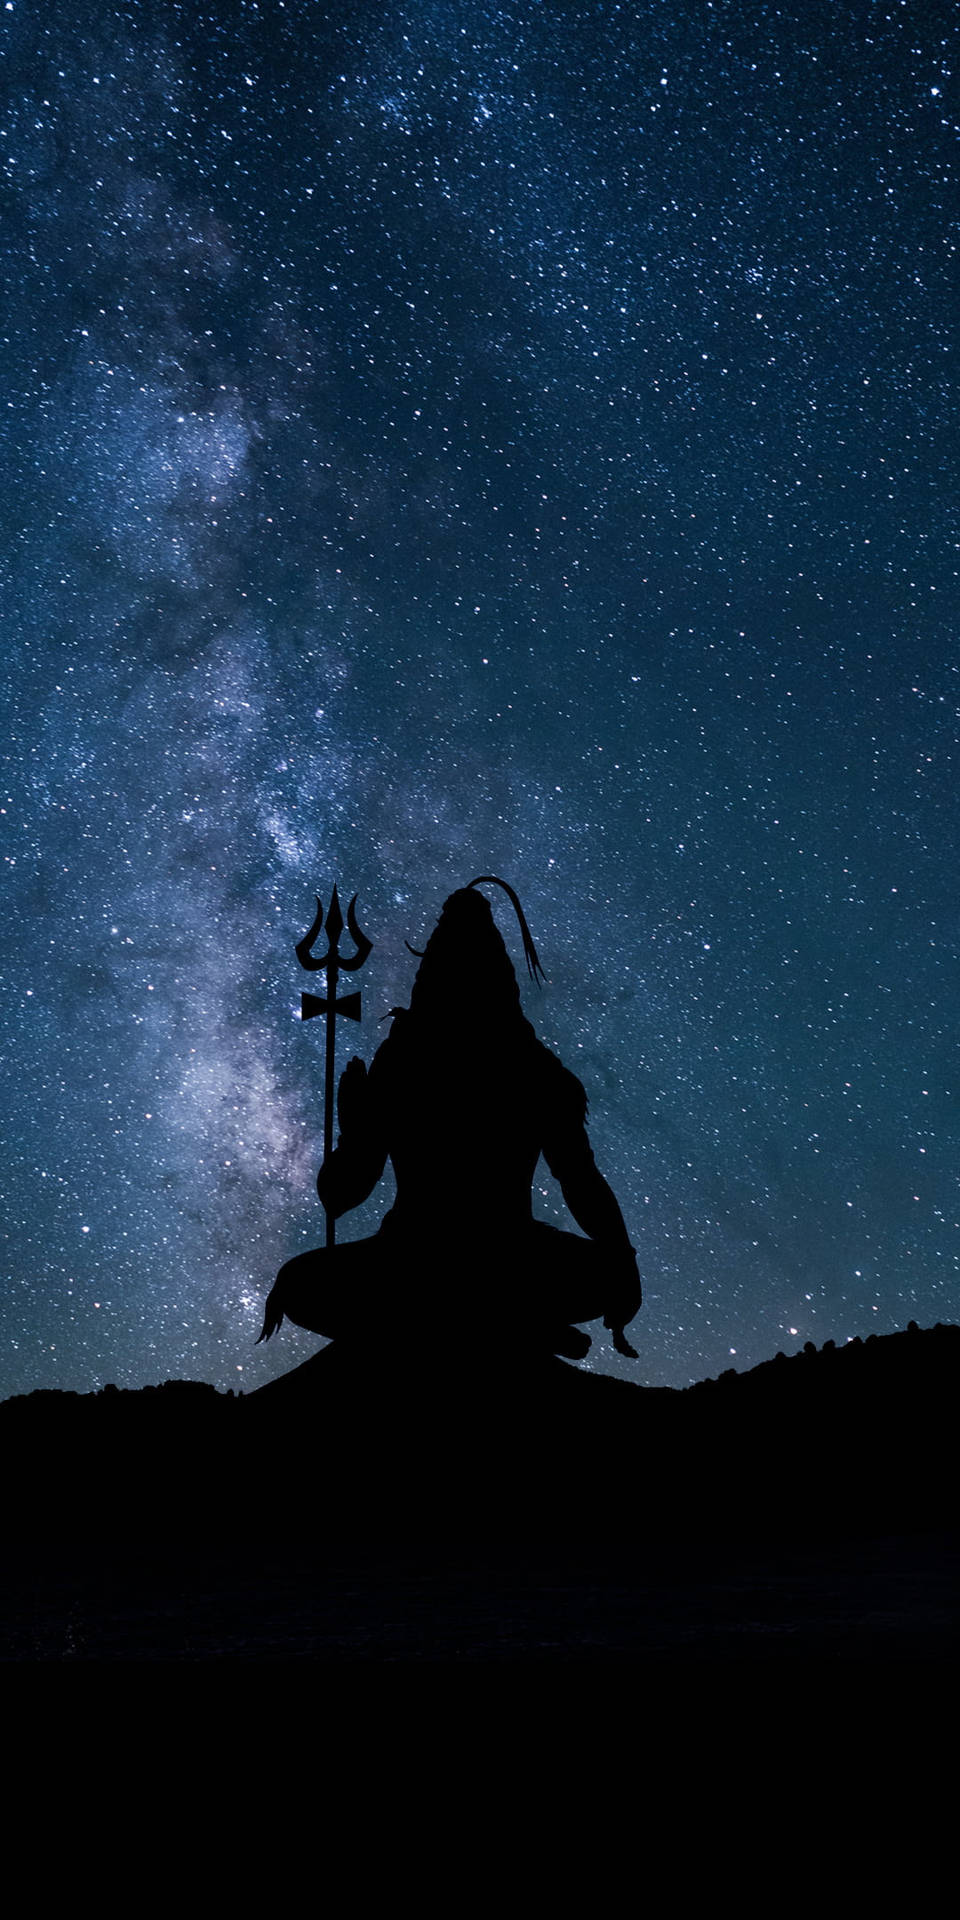 Shiva Photos, Download The BEST Free Shiva Stock Photos & HD Images